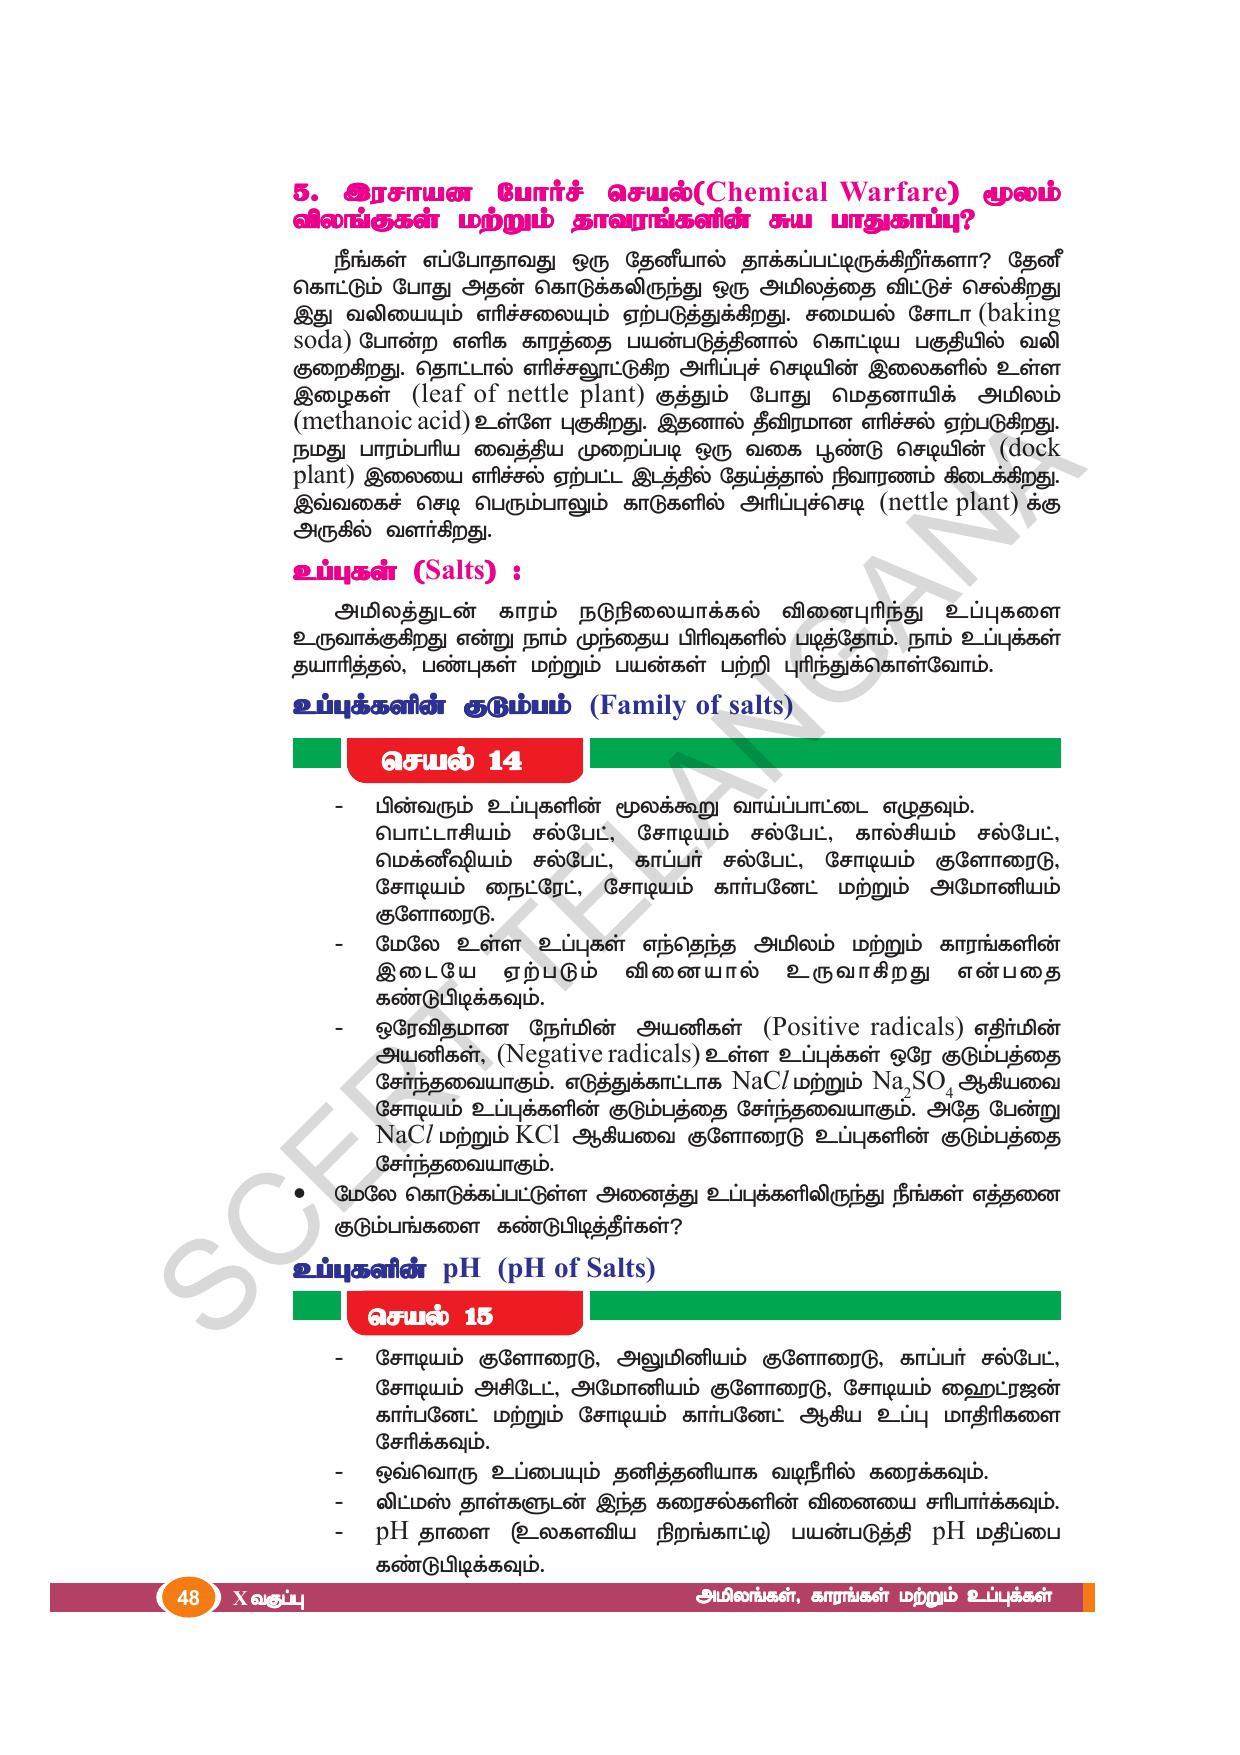 TS SCERT Class 10 Physical Science(Tamil Medium) Text Book - Page 60